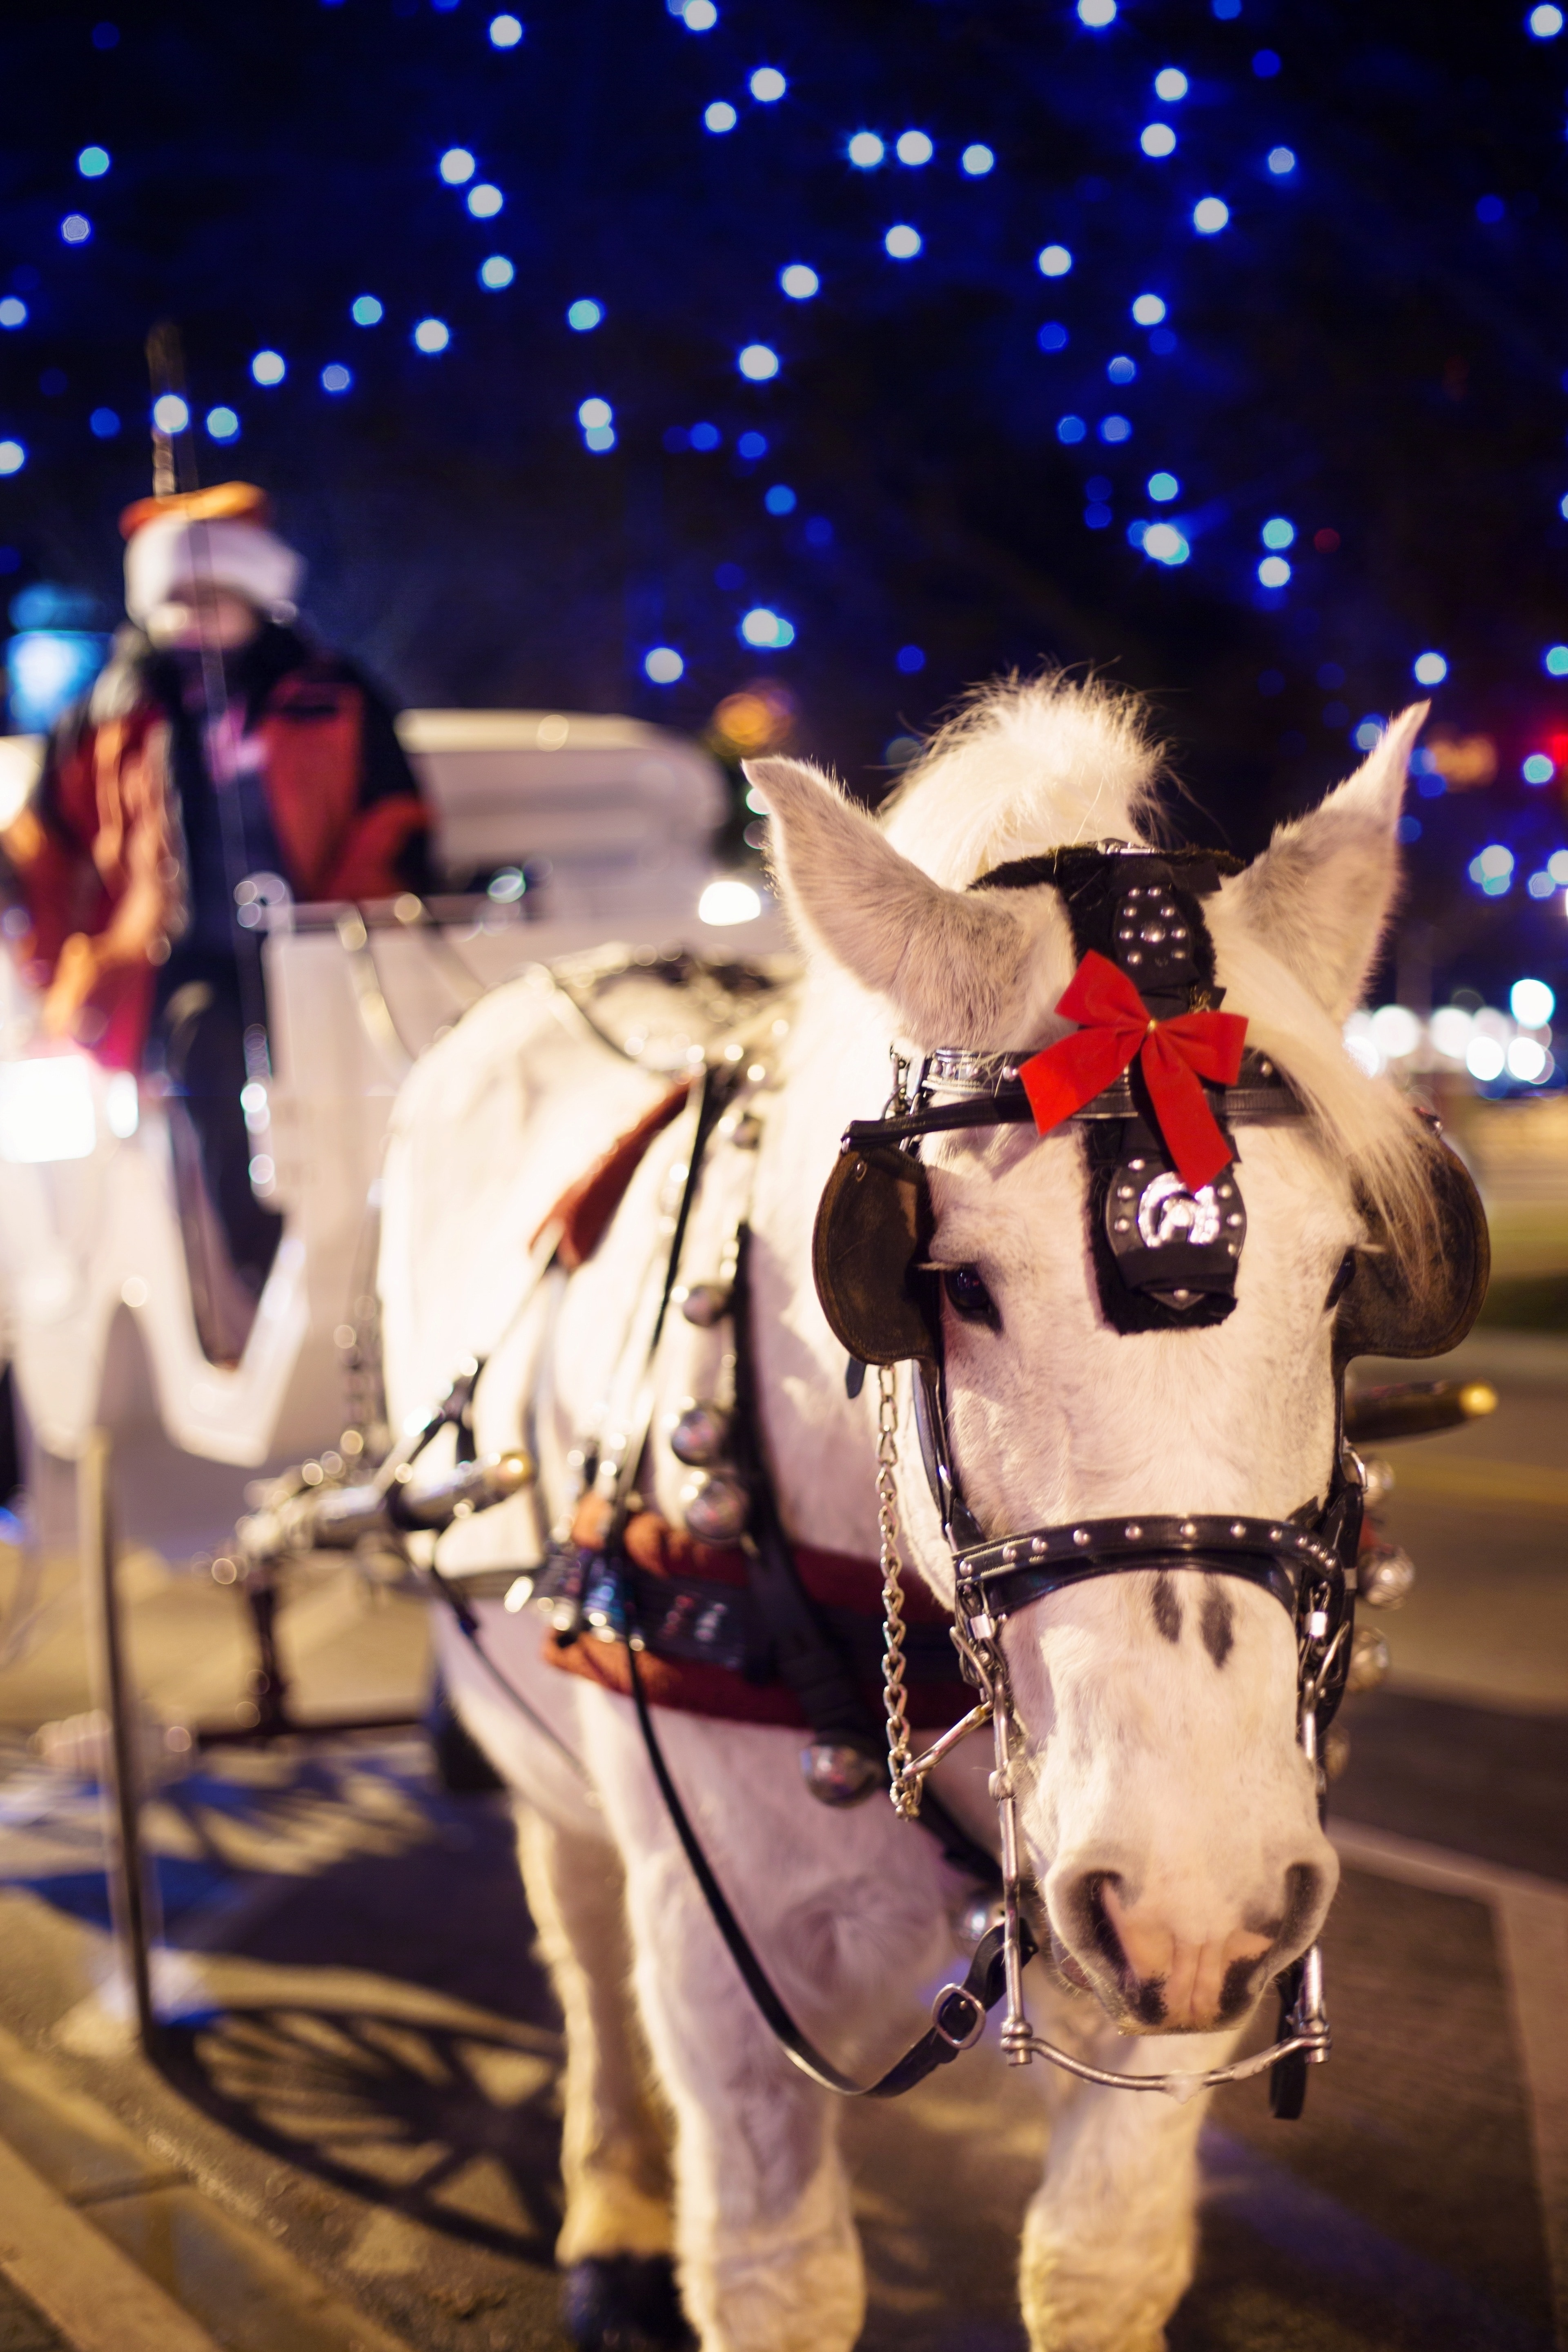 Horse Carriage, Christmas, Horse, Winter, horse, night